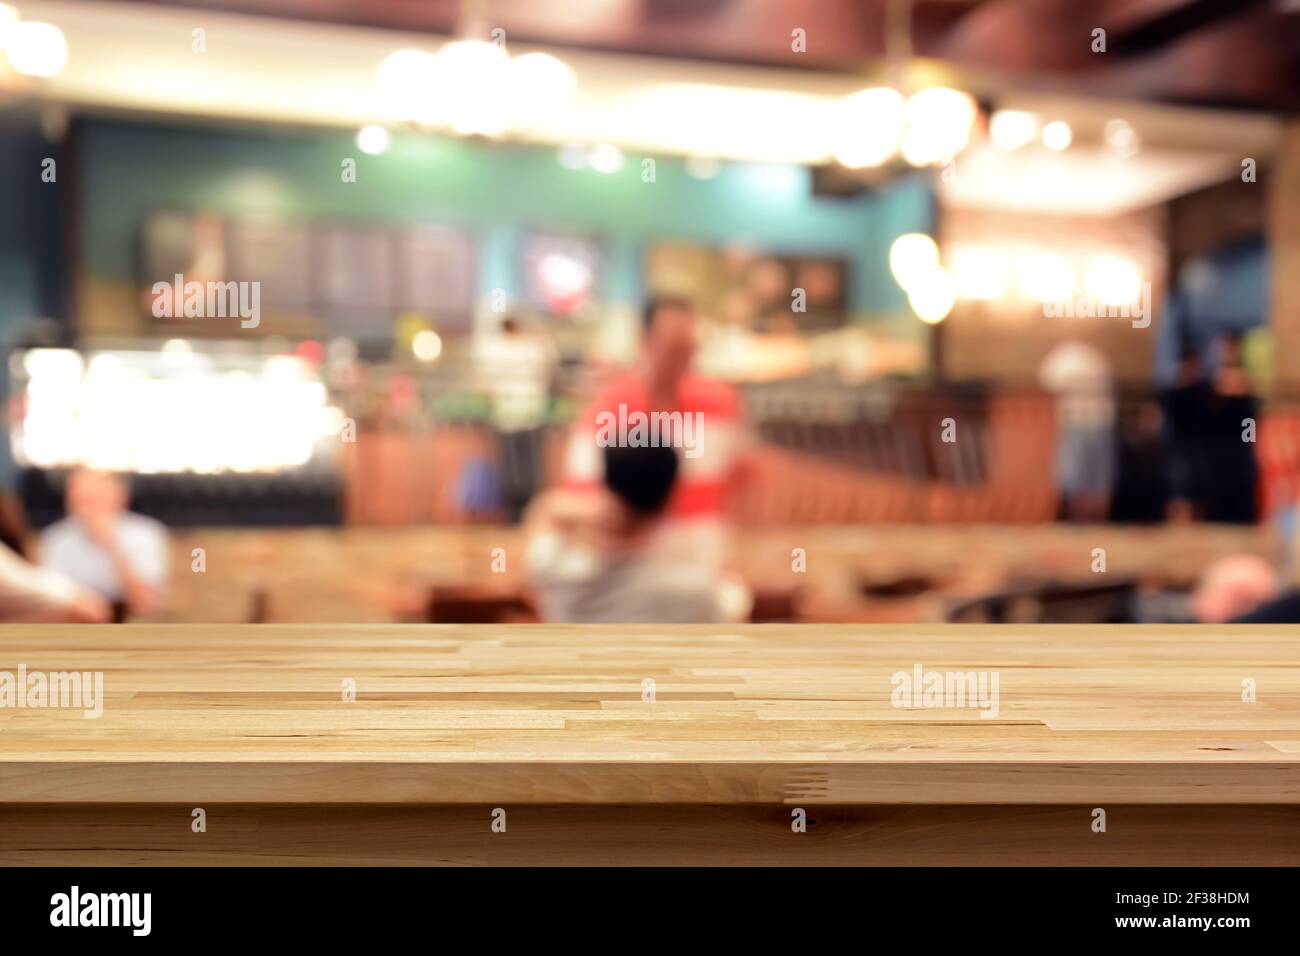 Wood table top on blur background of coffee shop interior with some people - can be used for display or montage your products Stock Photo